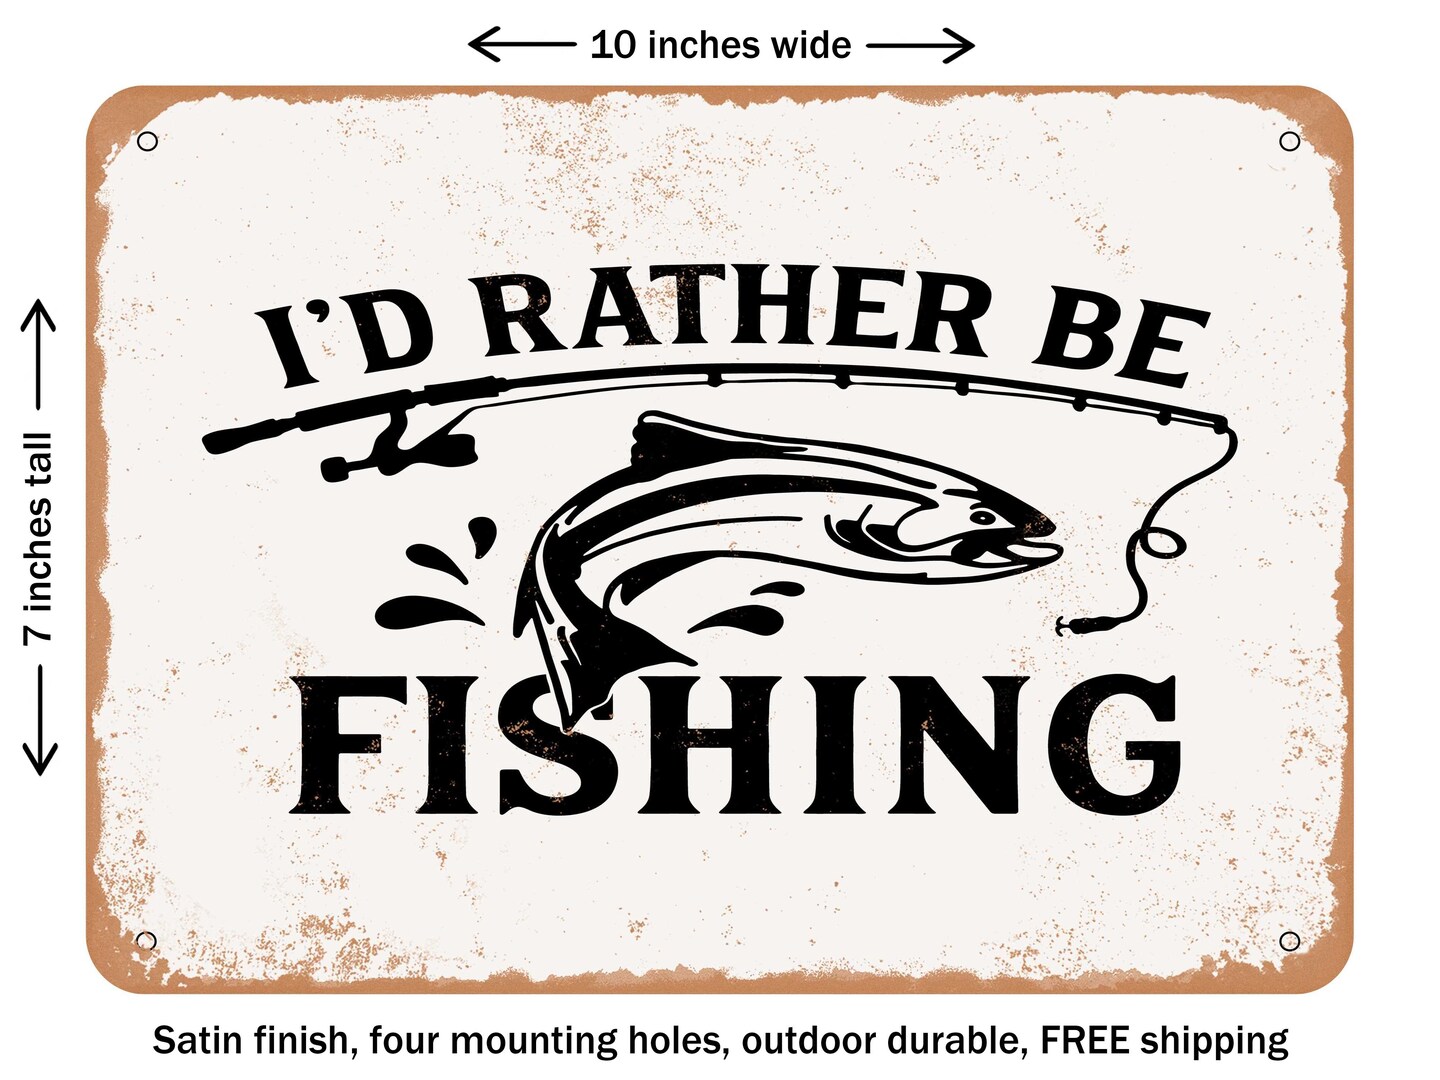 DECORATIVE METAL SIGN - Id Rather Be Fishing - 2 - Vintage Rusty Look